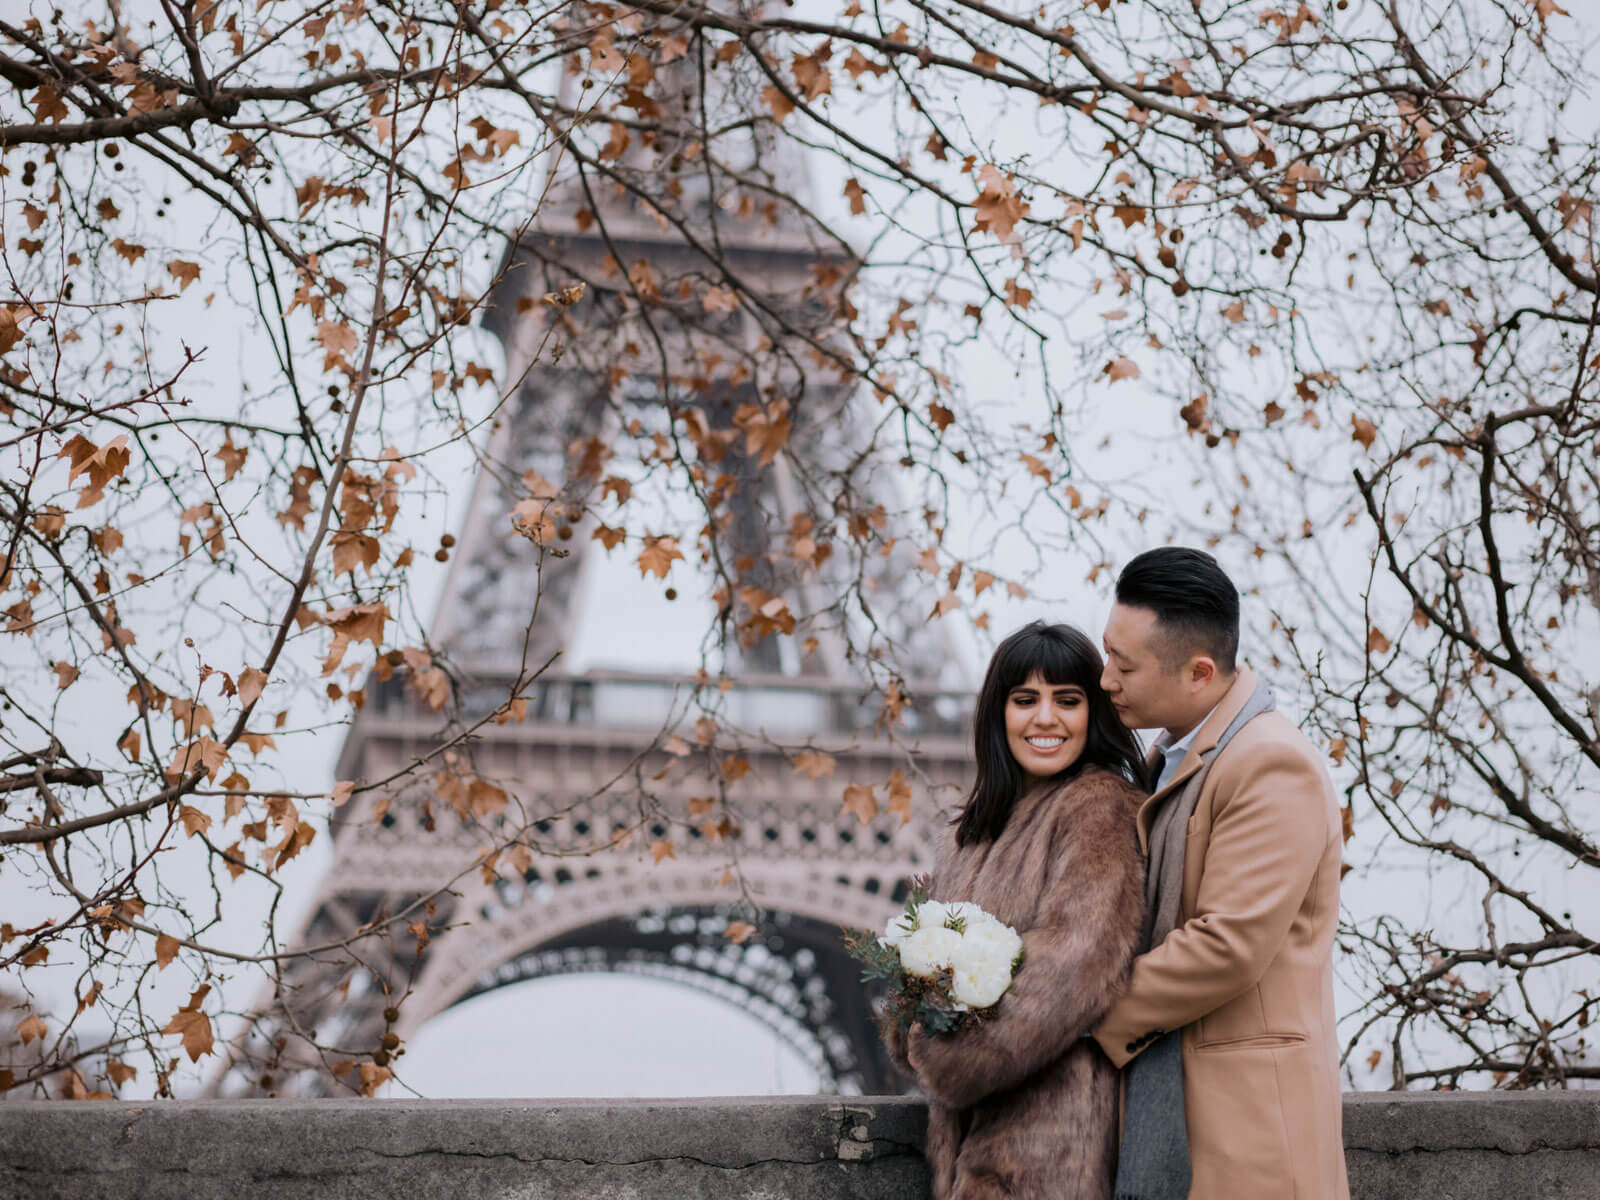 The bride and groom is standing in front of the Eiffel Tower, Paris, France for their New Year's destination wedding. Image by Jenny Fu Studio